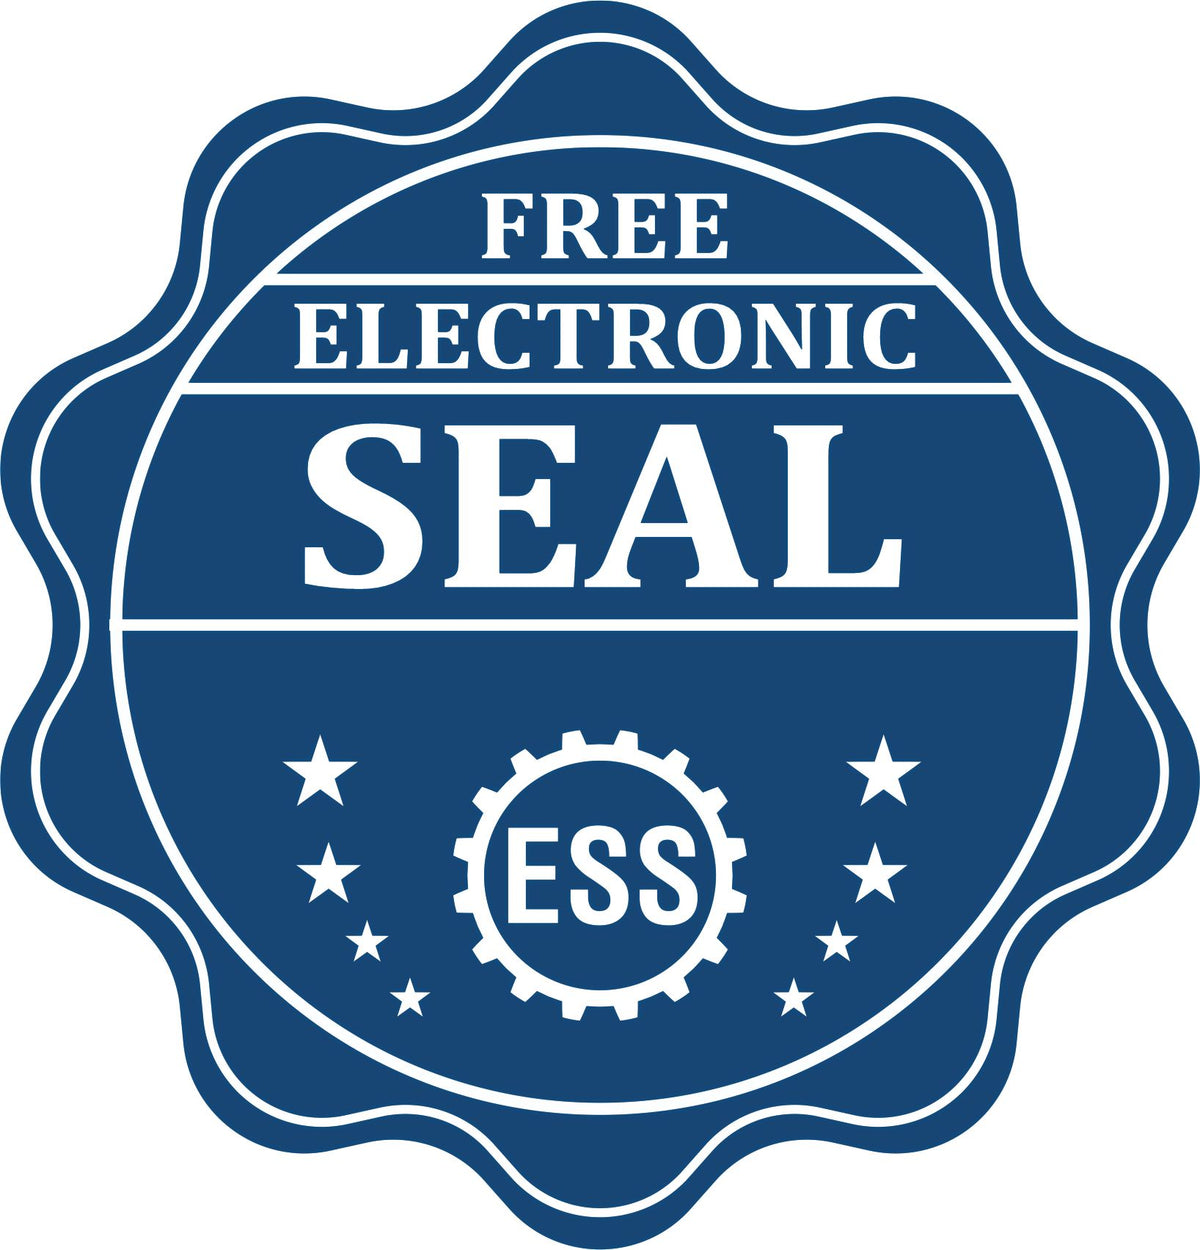 A badge showing a free electronic seal for the PSI Georgia Notary Stamp with stars and the ESS gear on the emblem.